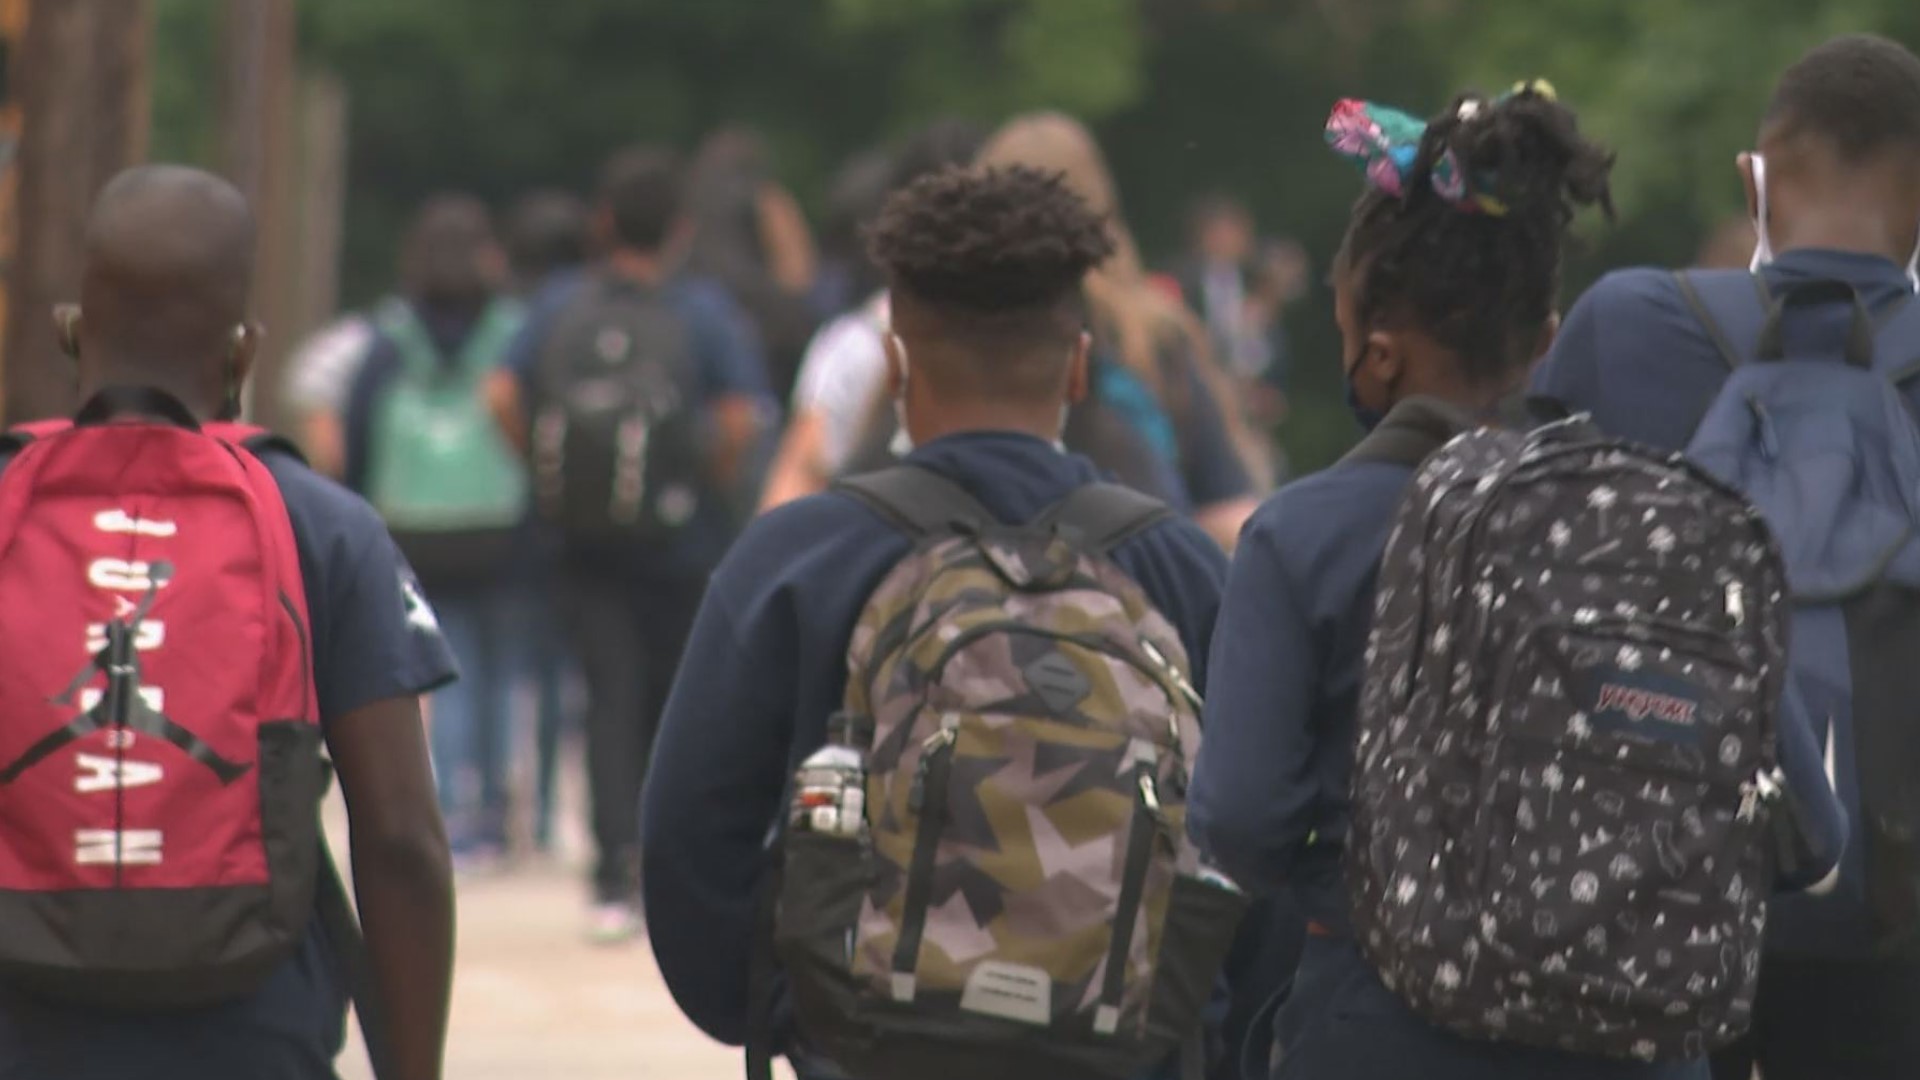 As Georgia kids go back to school for the fall semester, some parents are concerned over the spike in COVID-19 cases.